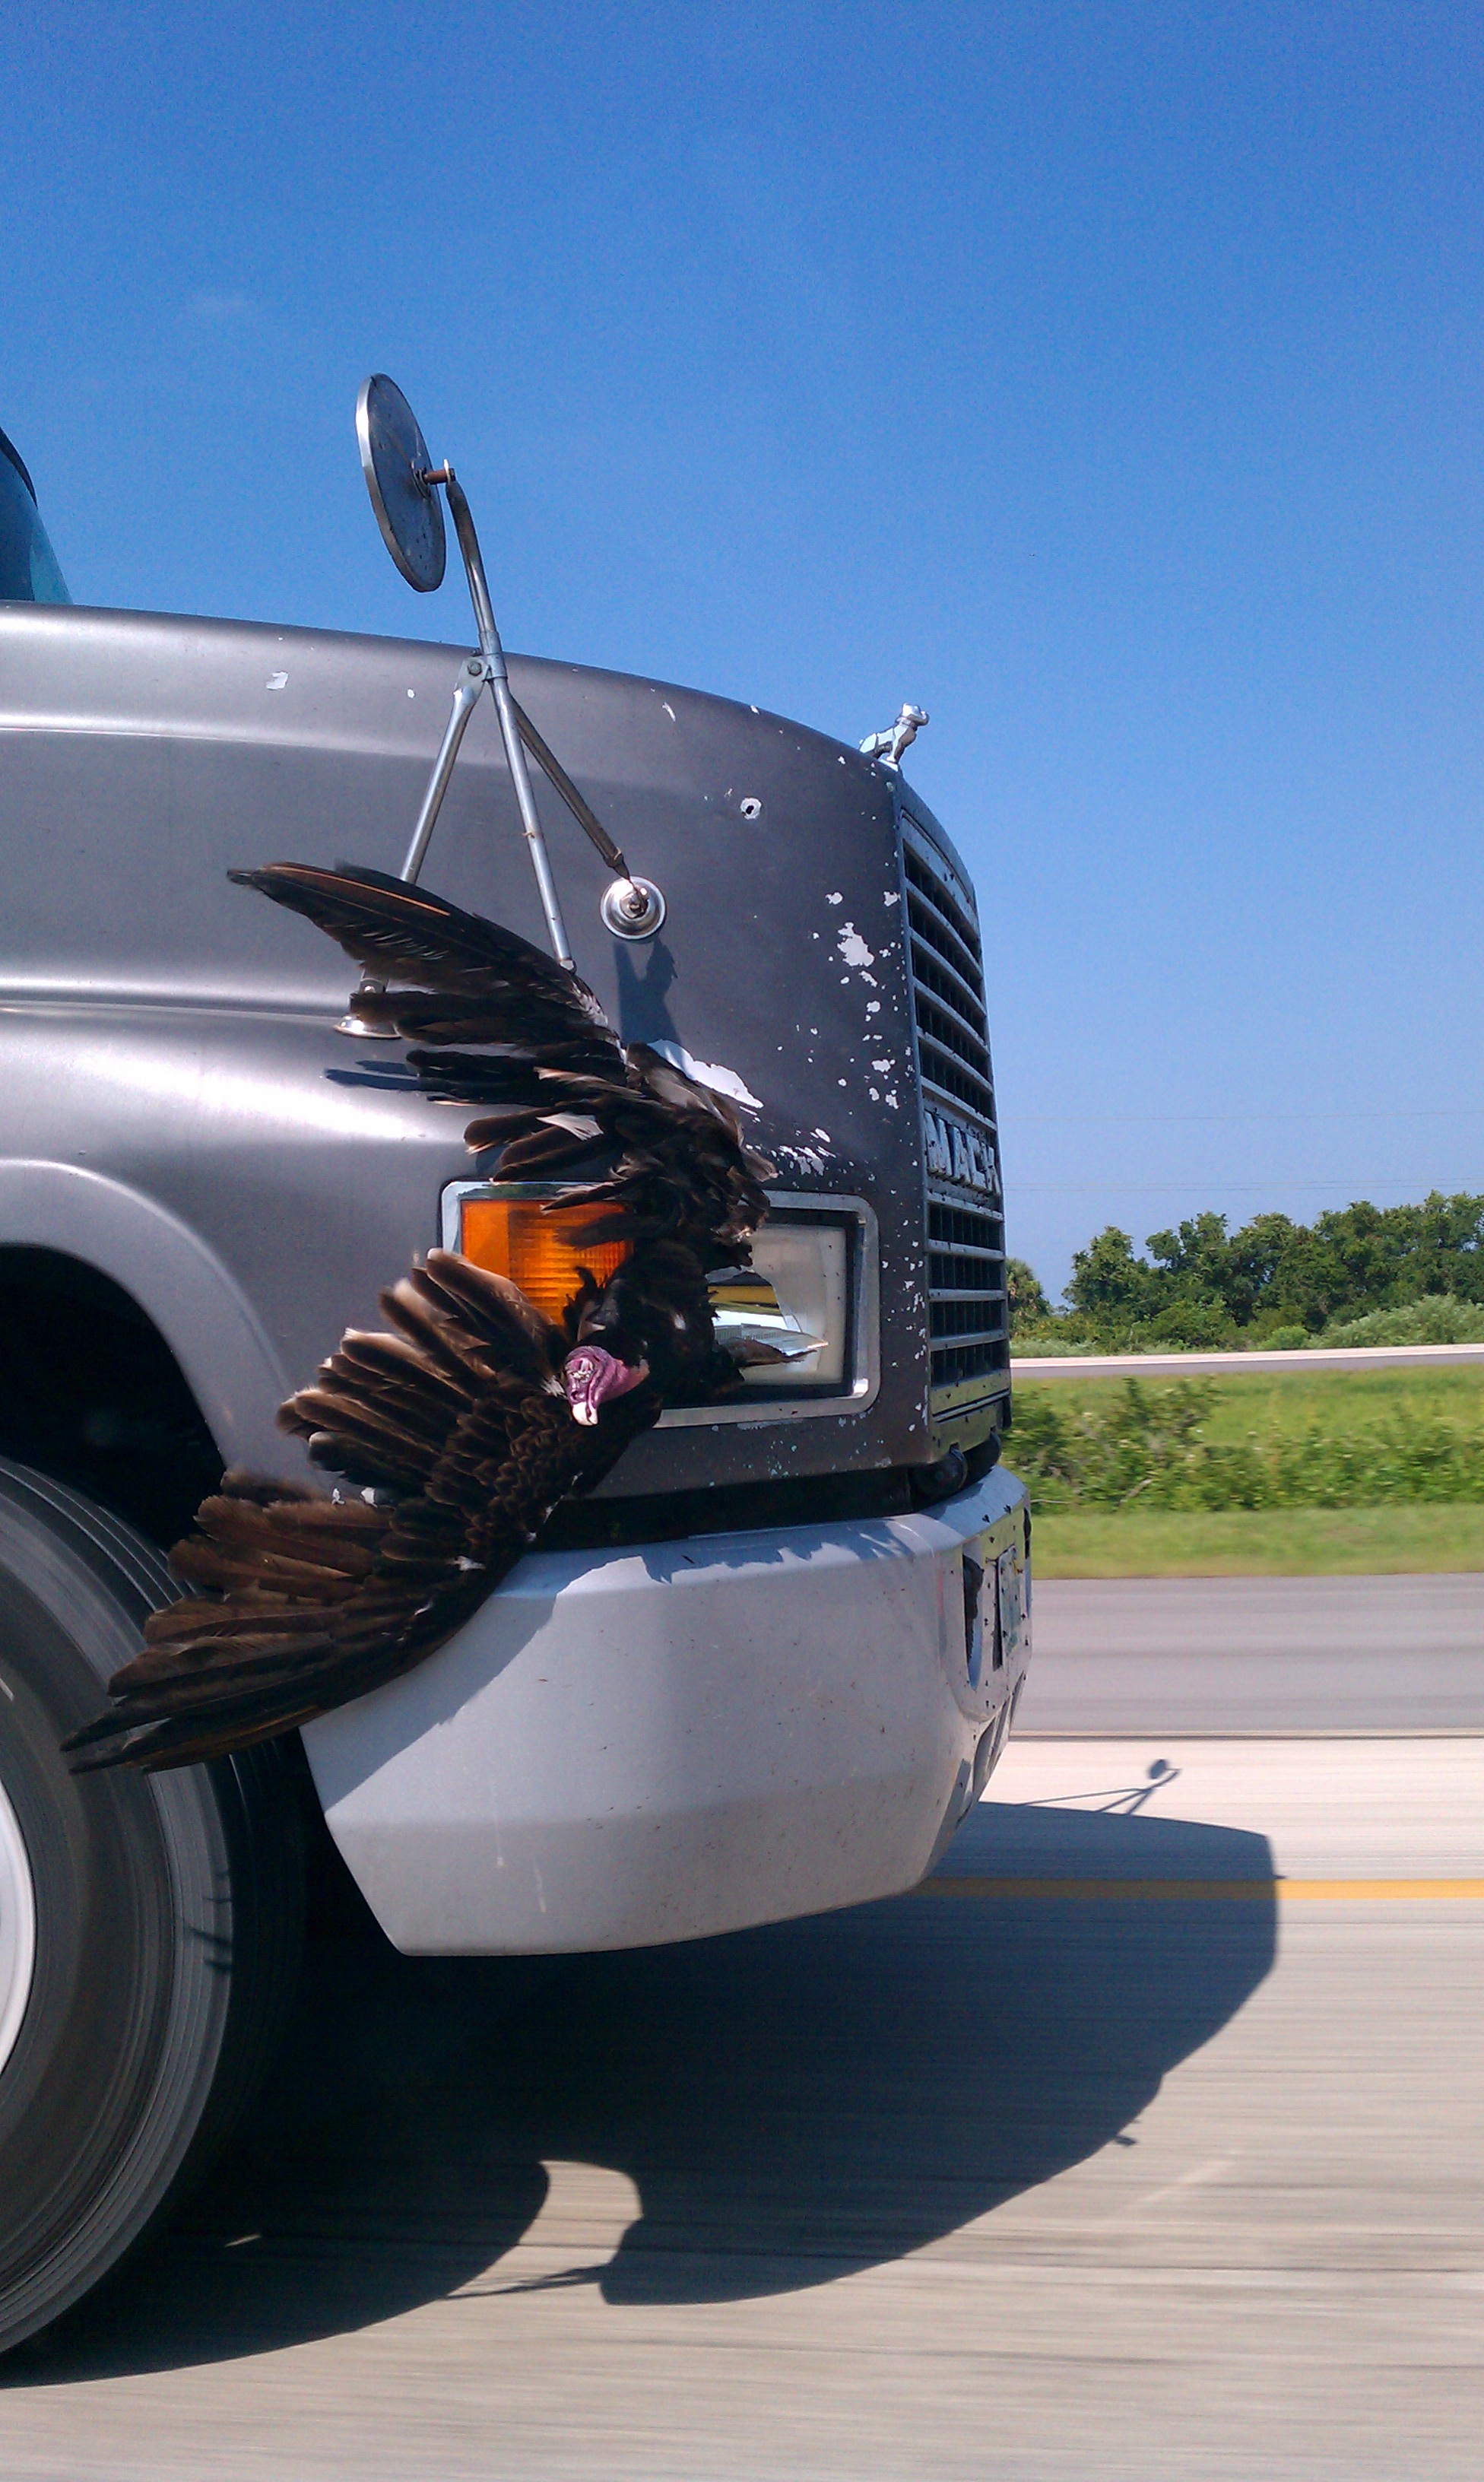 Driver stops for gas.  "Hey buddy, you know there's a buzzard on your grill?" 